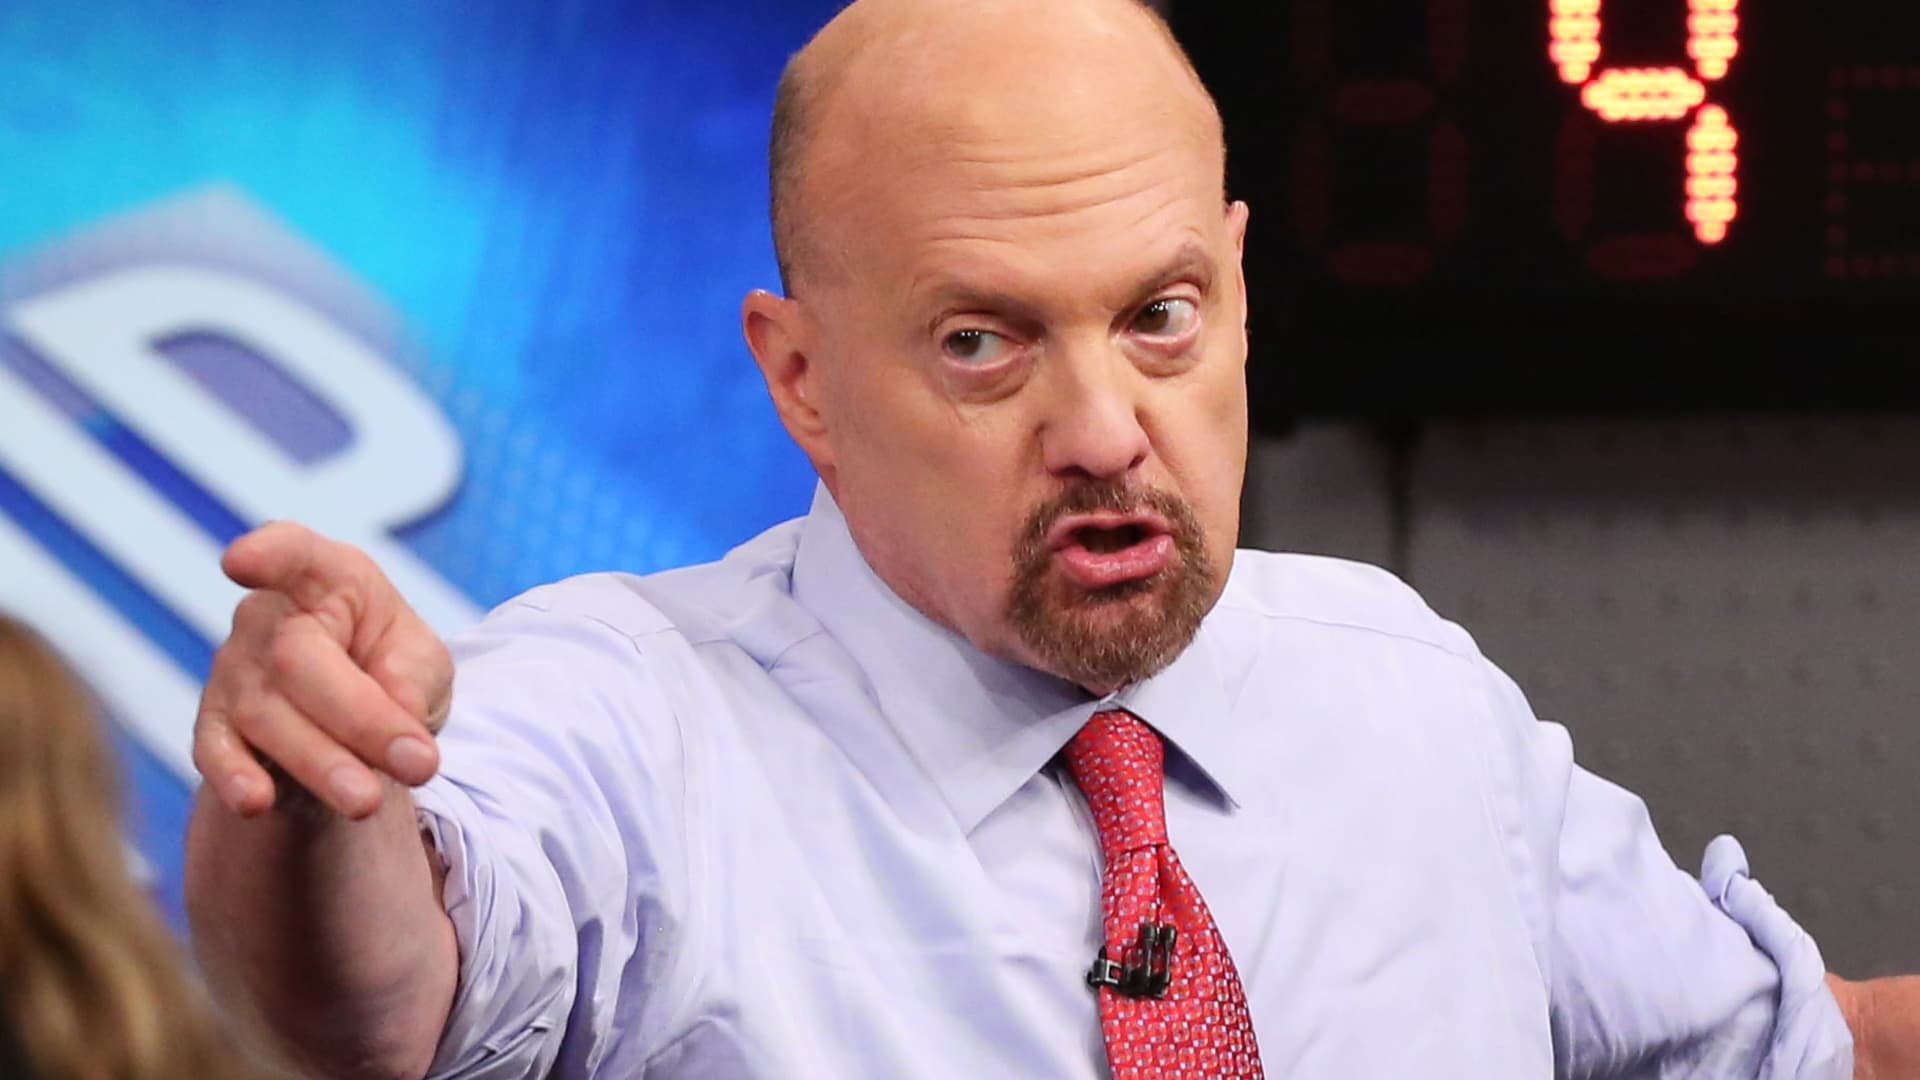 Jim Cramer says to buy the dip on days like Monday: ‘It’ll be too late’ if you w..